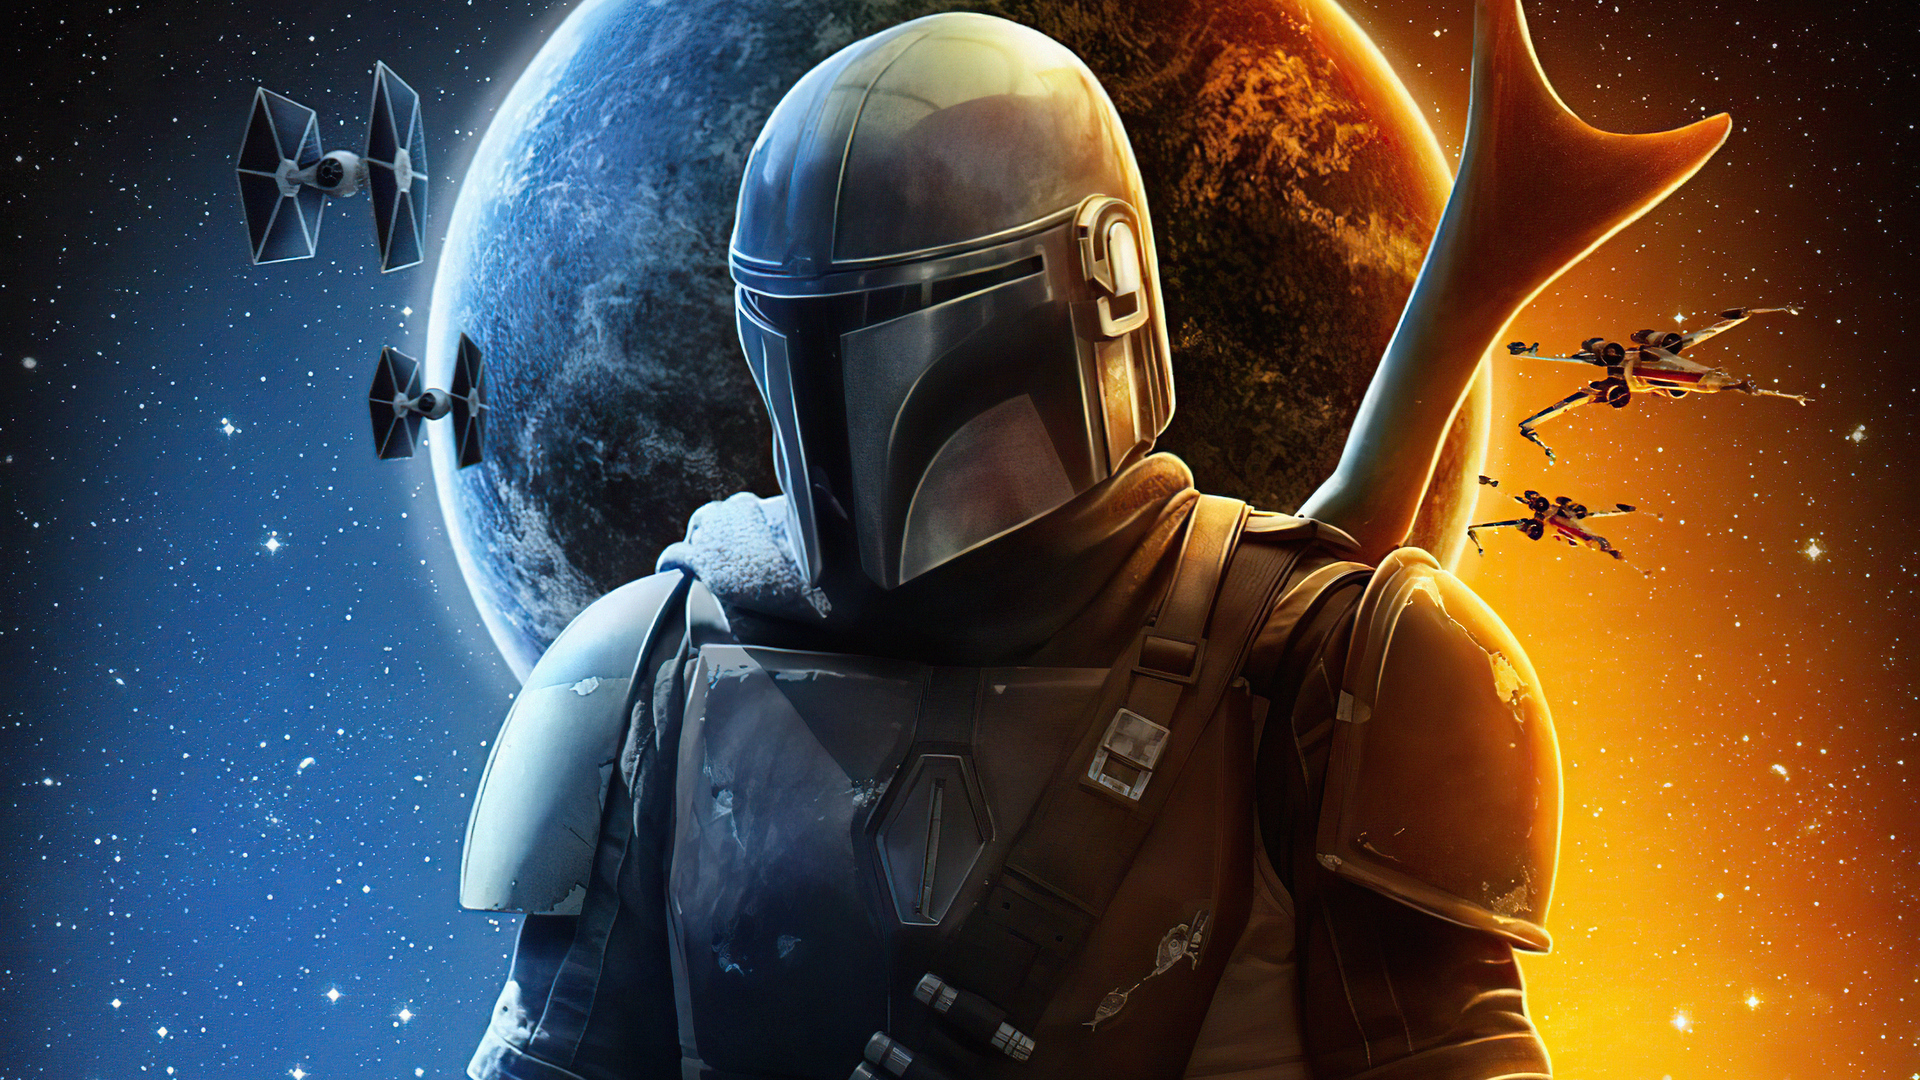 Exclusive Insider Details on the Cancelation of Respawn’s Mandalorian Star Wars Game